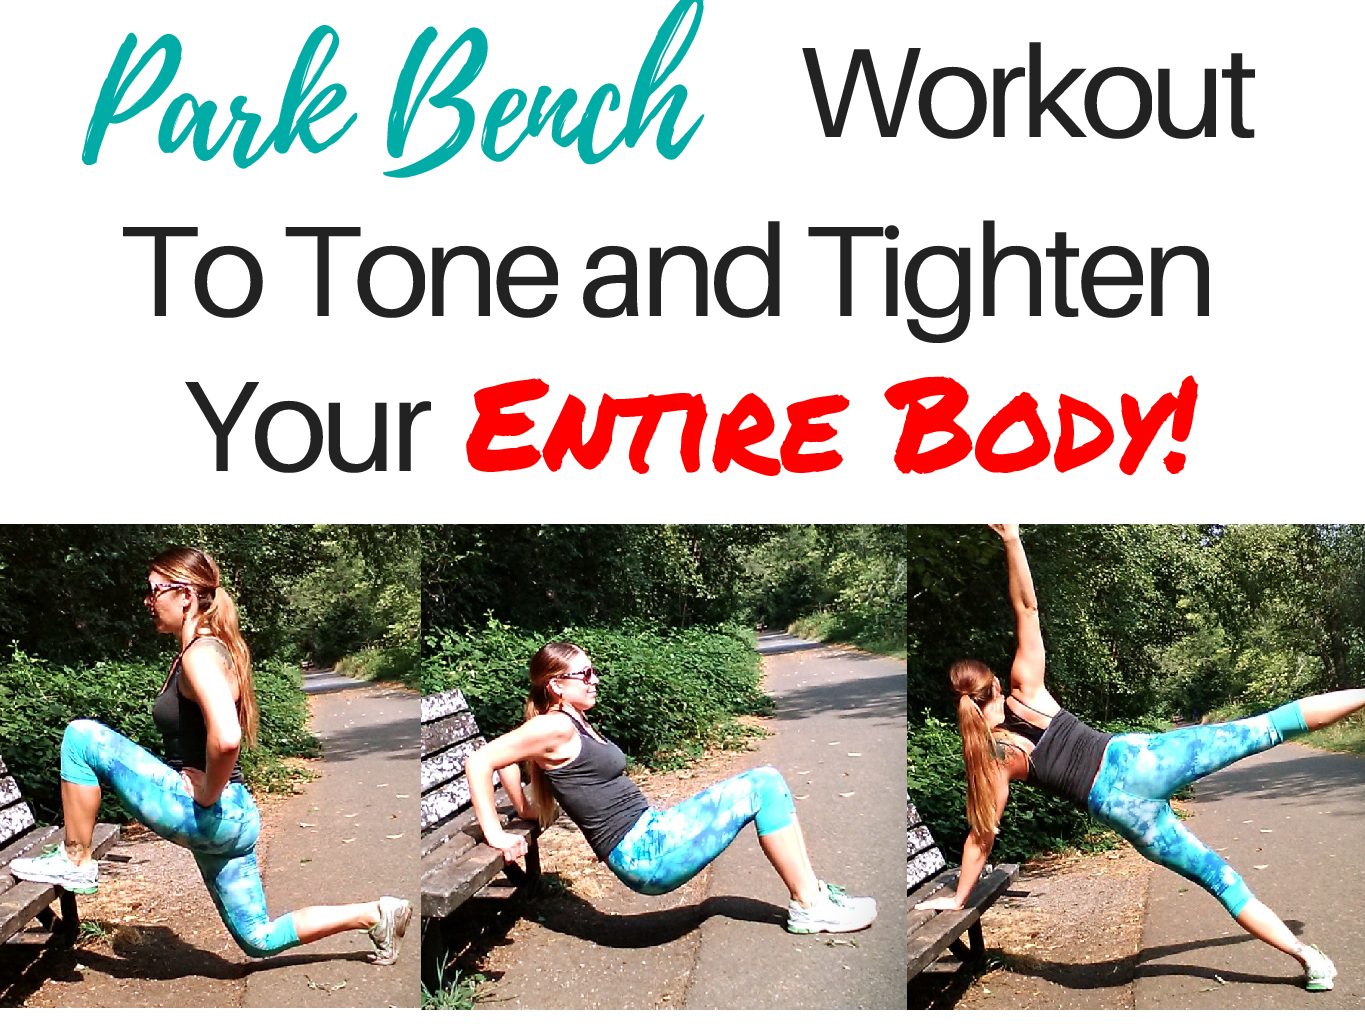 Park Bench Workout To Tone and Tighten Your Entire Body